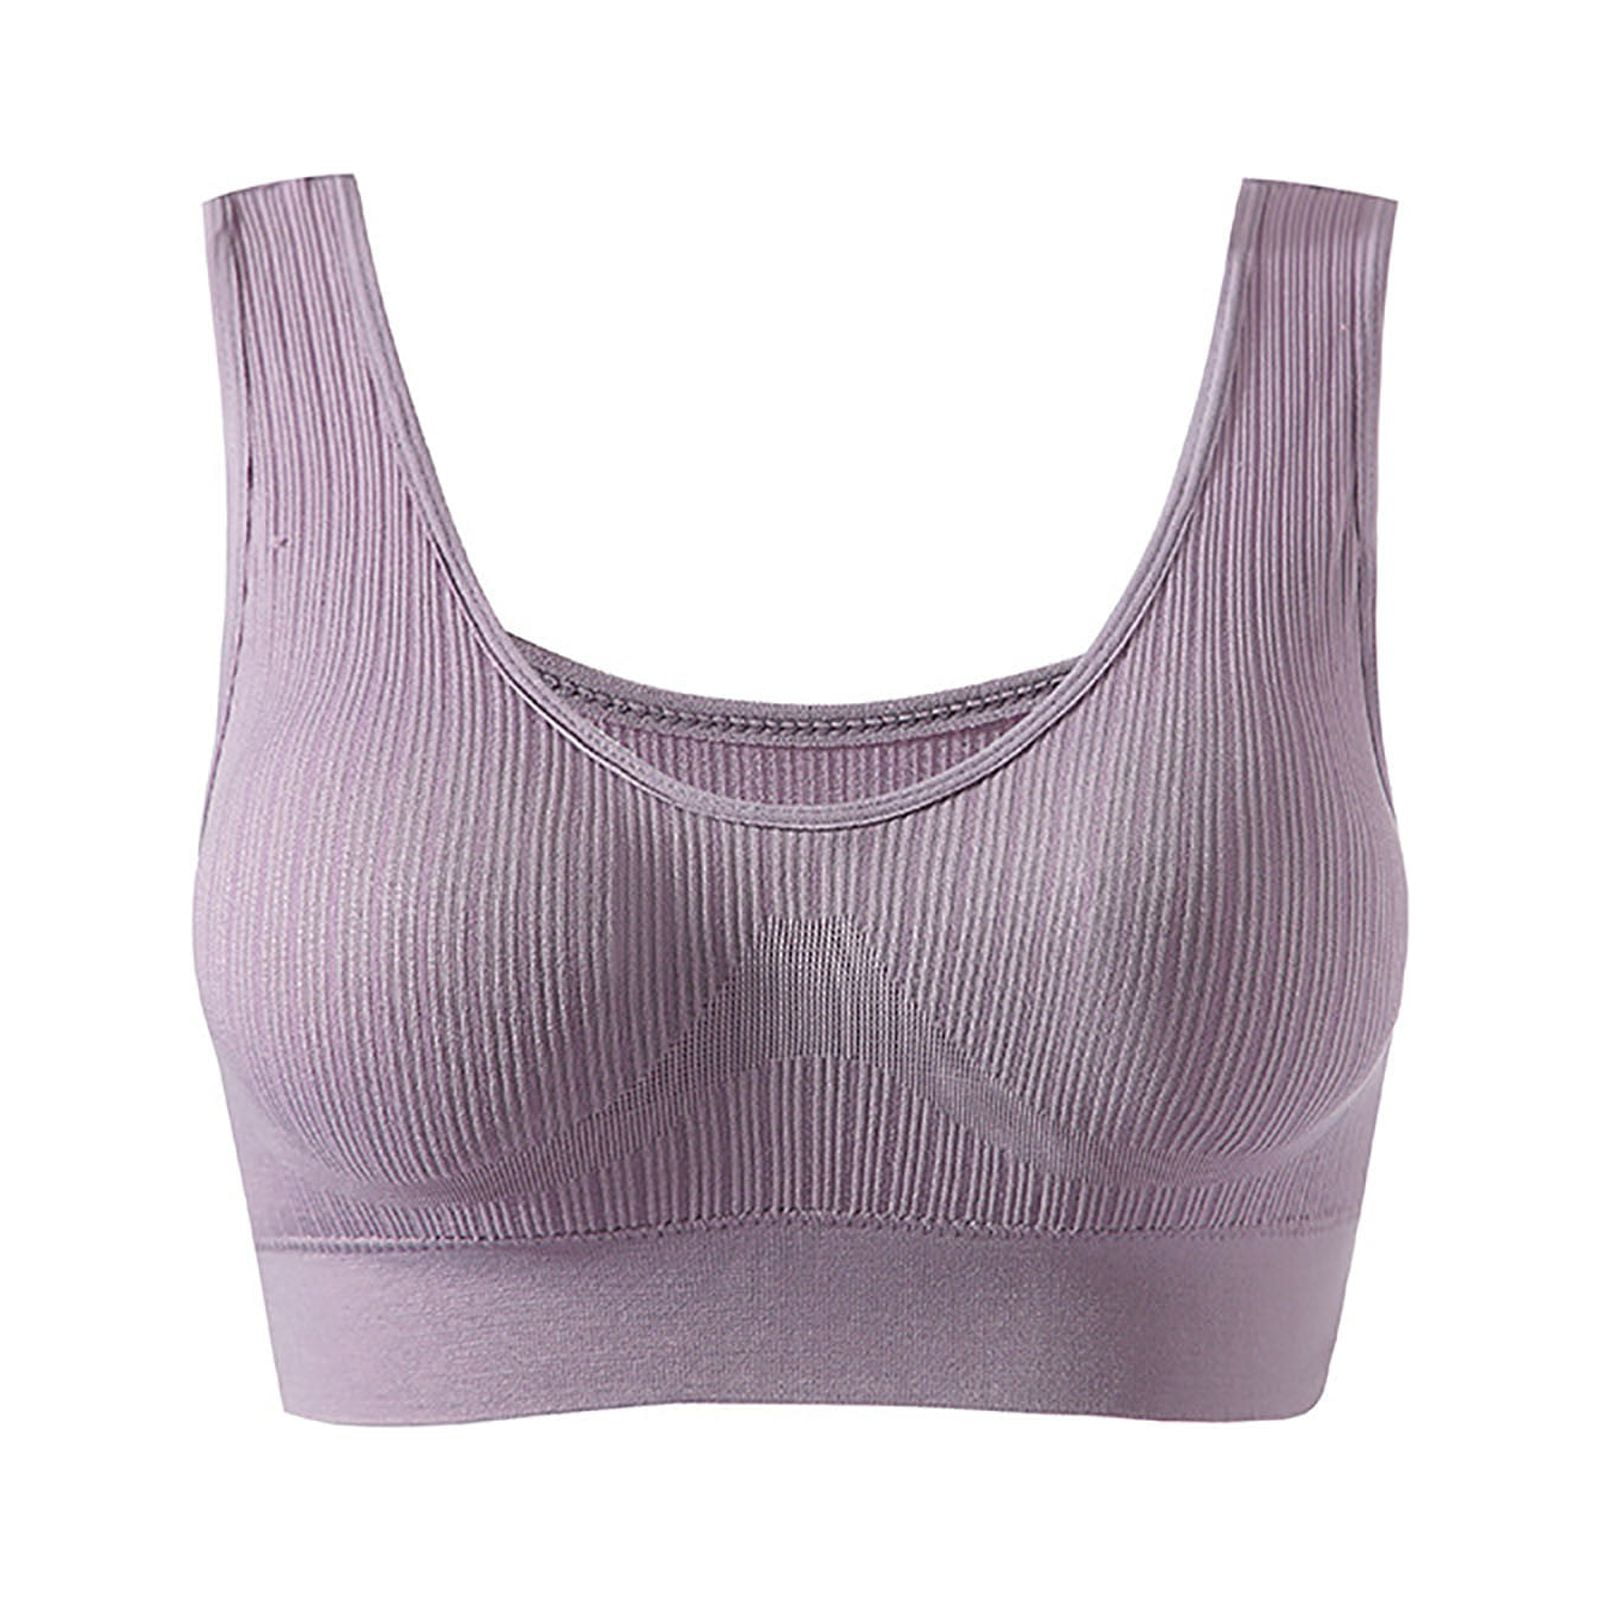 CAICJ98 Bras For Women High Impact Sports Bras for Women, Criss-Cross Back  Padded Strappy Sports Bras Workout Top Grey,4XL 